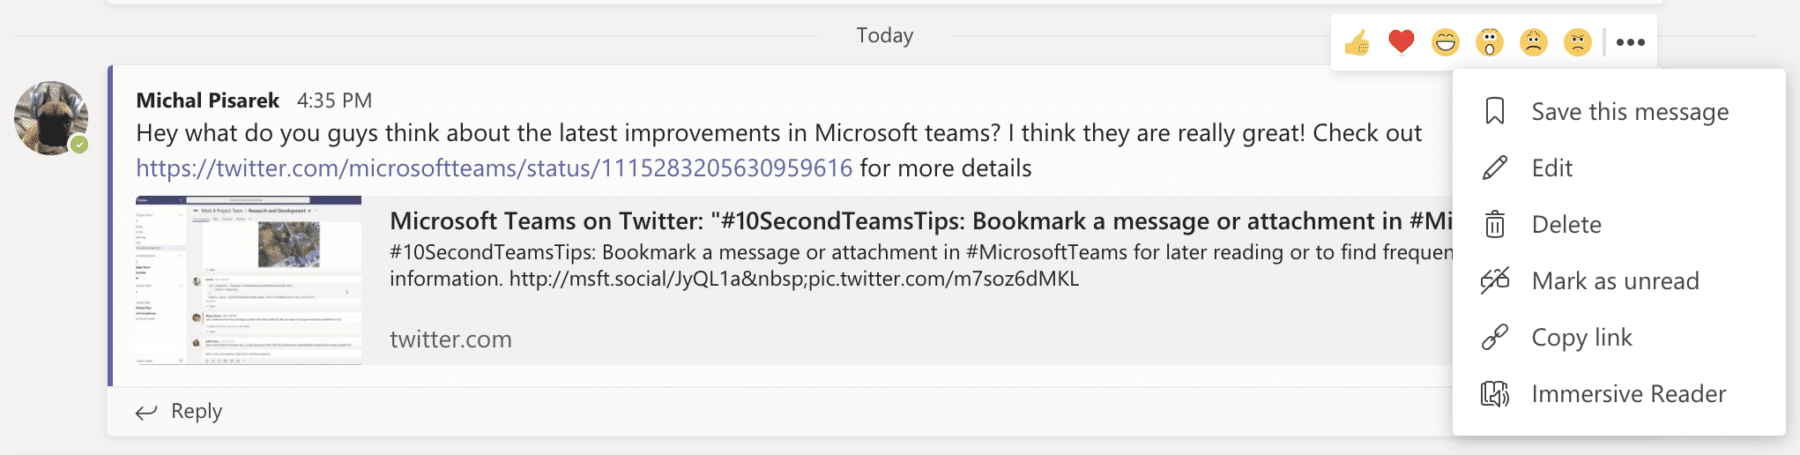 Microsoft Teams Save Conversation & Bookmarking how to